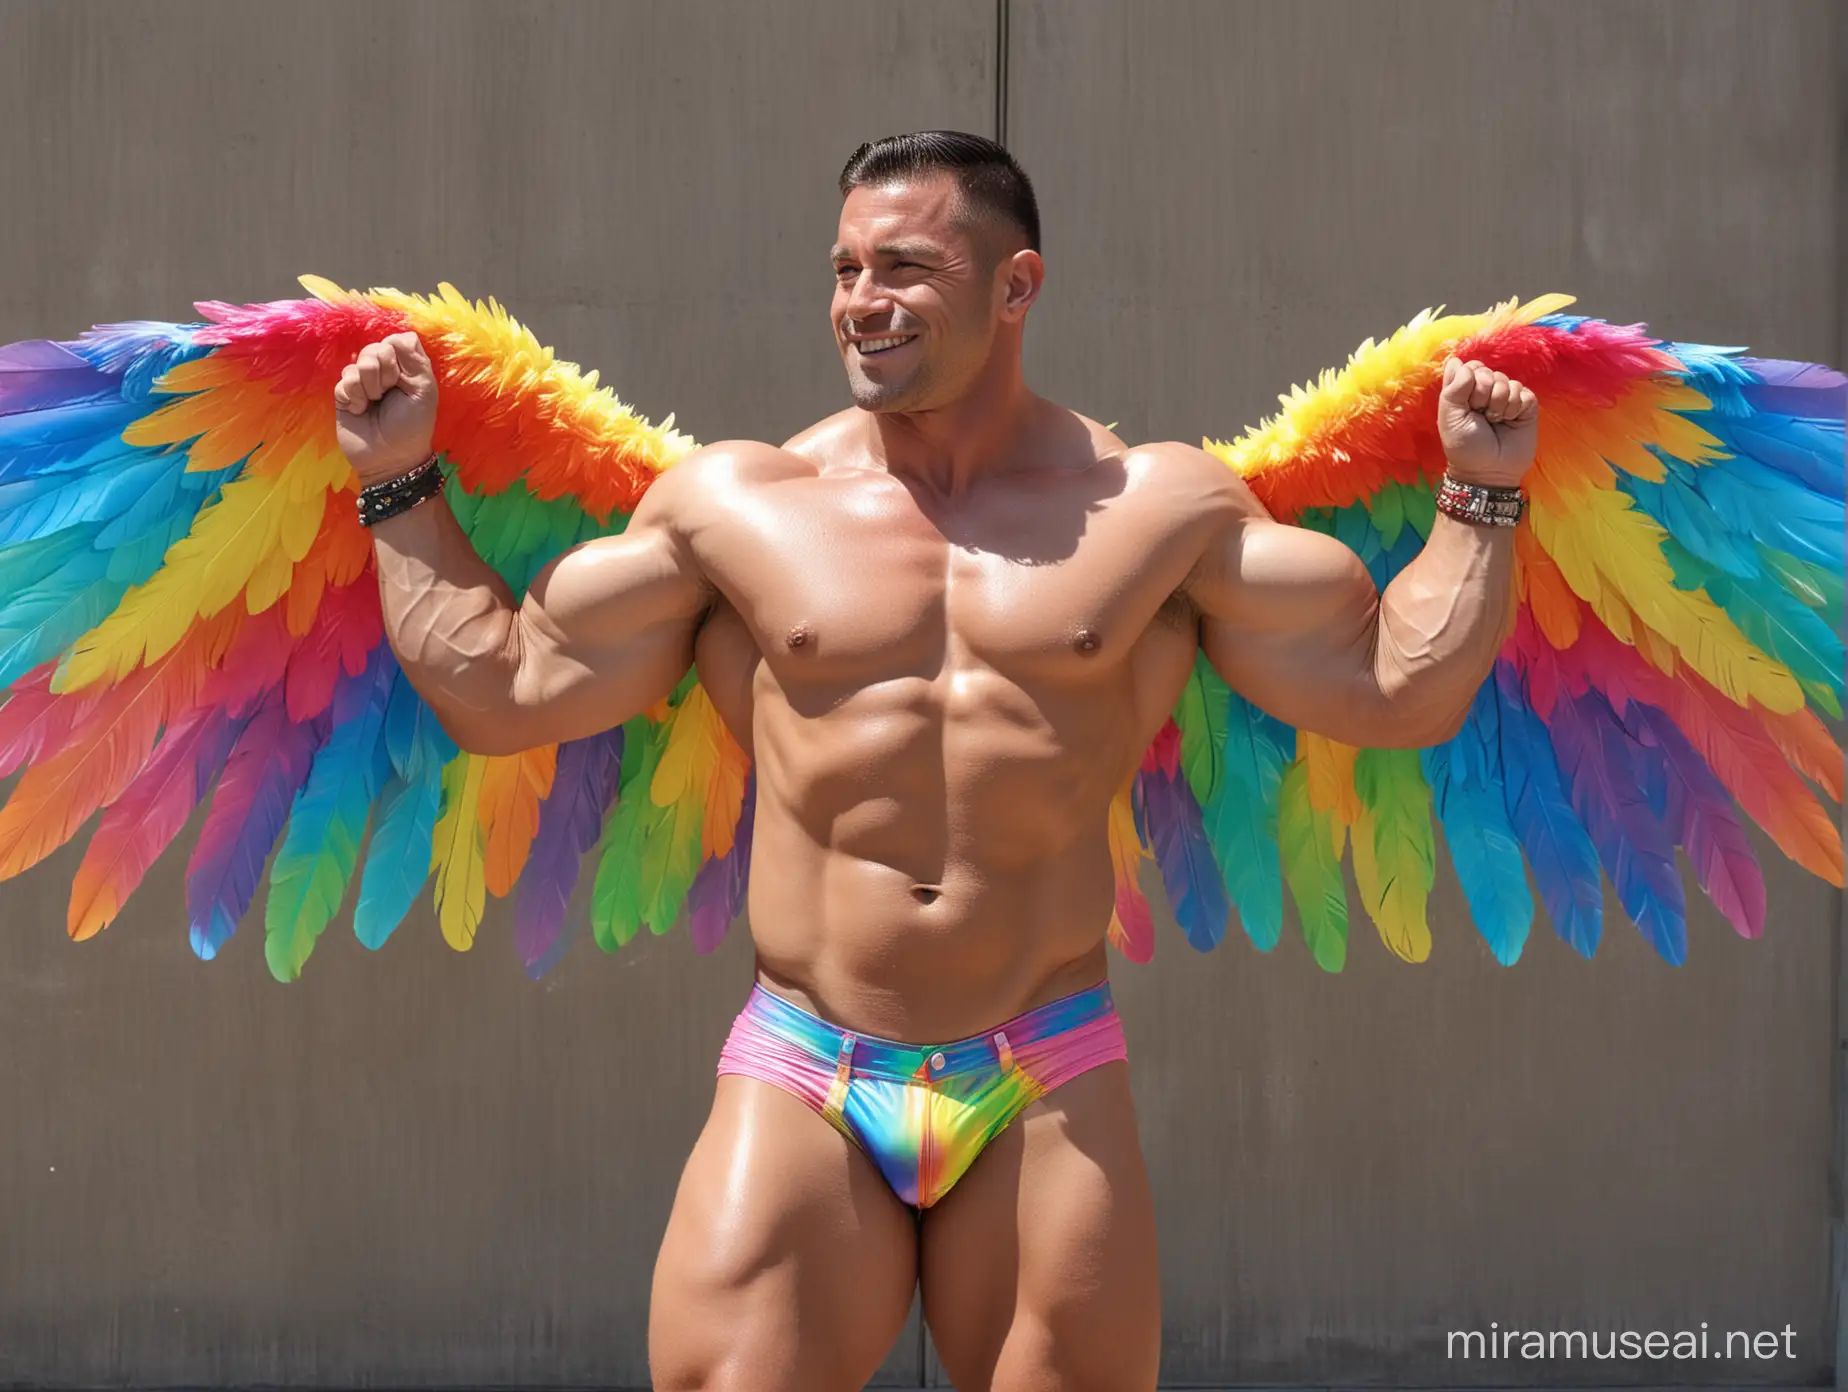 Ultra Beefy Bodybuilder Flexing with Rainbow Colored See Through Eagle Wings Jacket and Doraemon